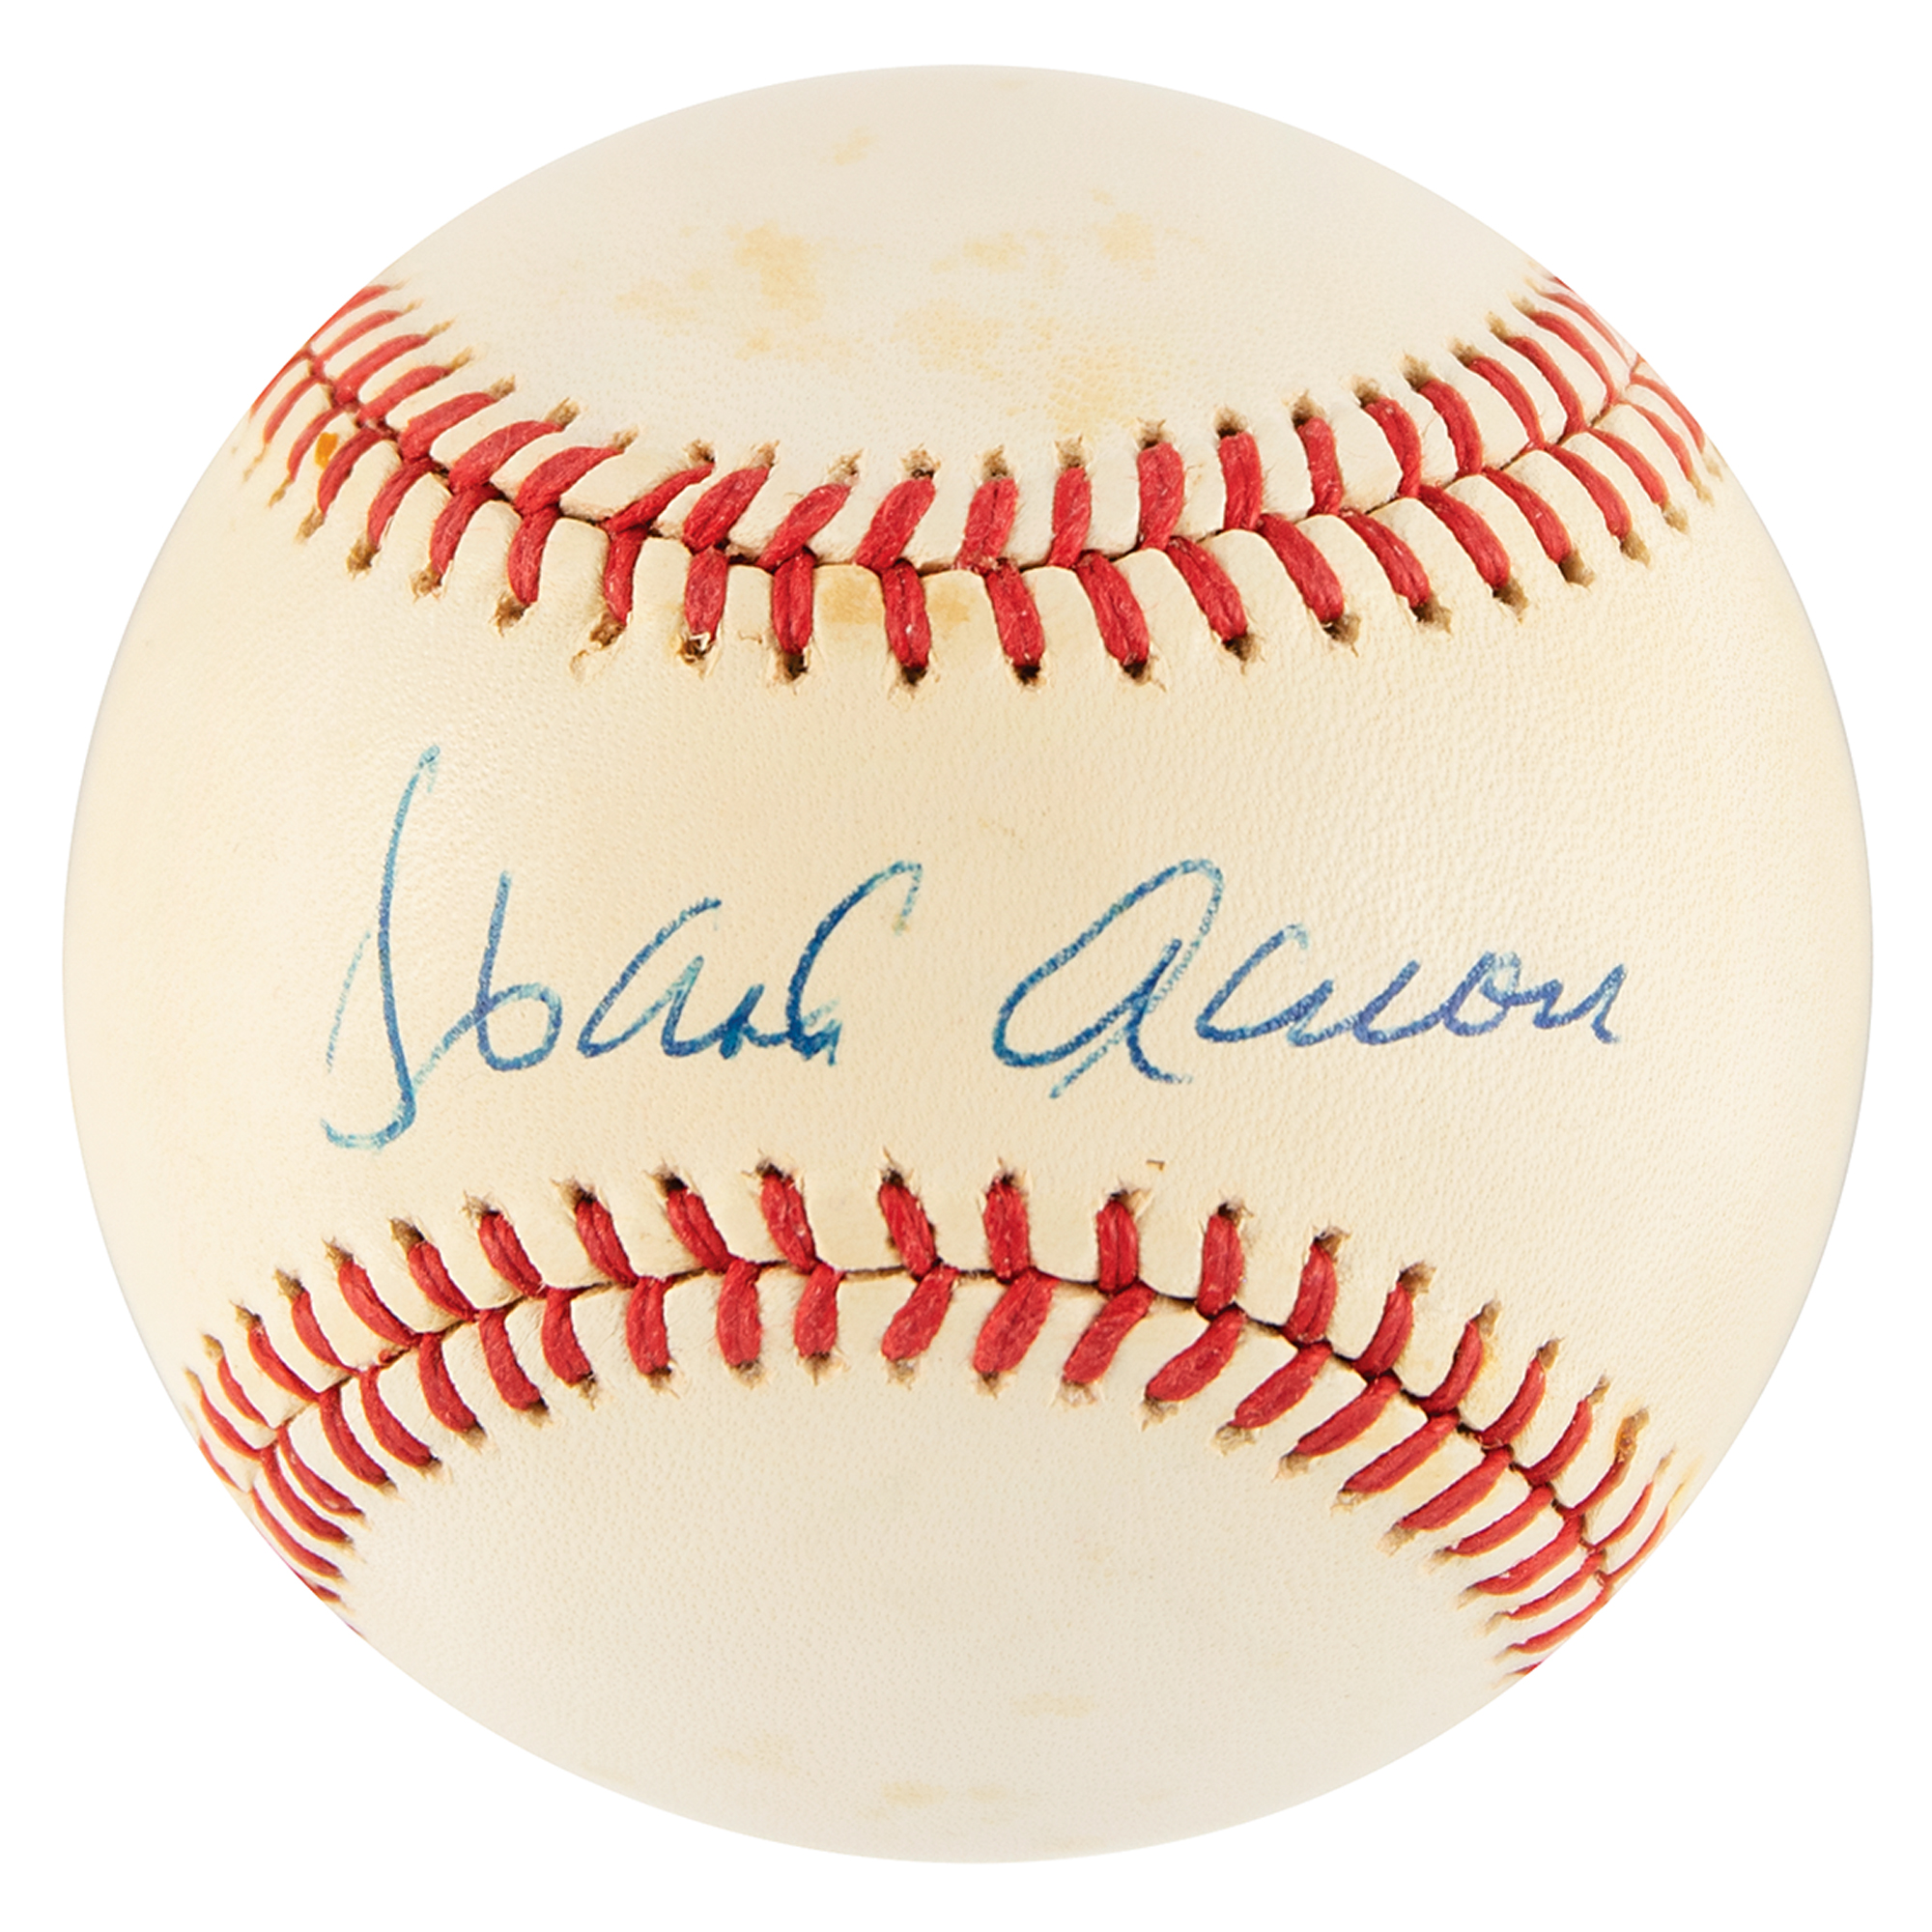 At Auction: Hank Aaron Autographed Baseball